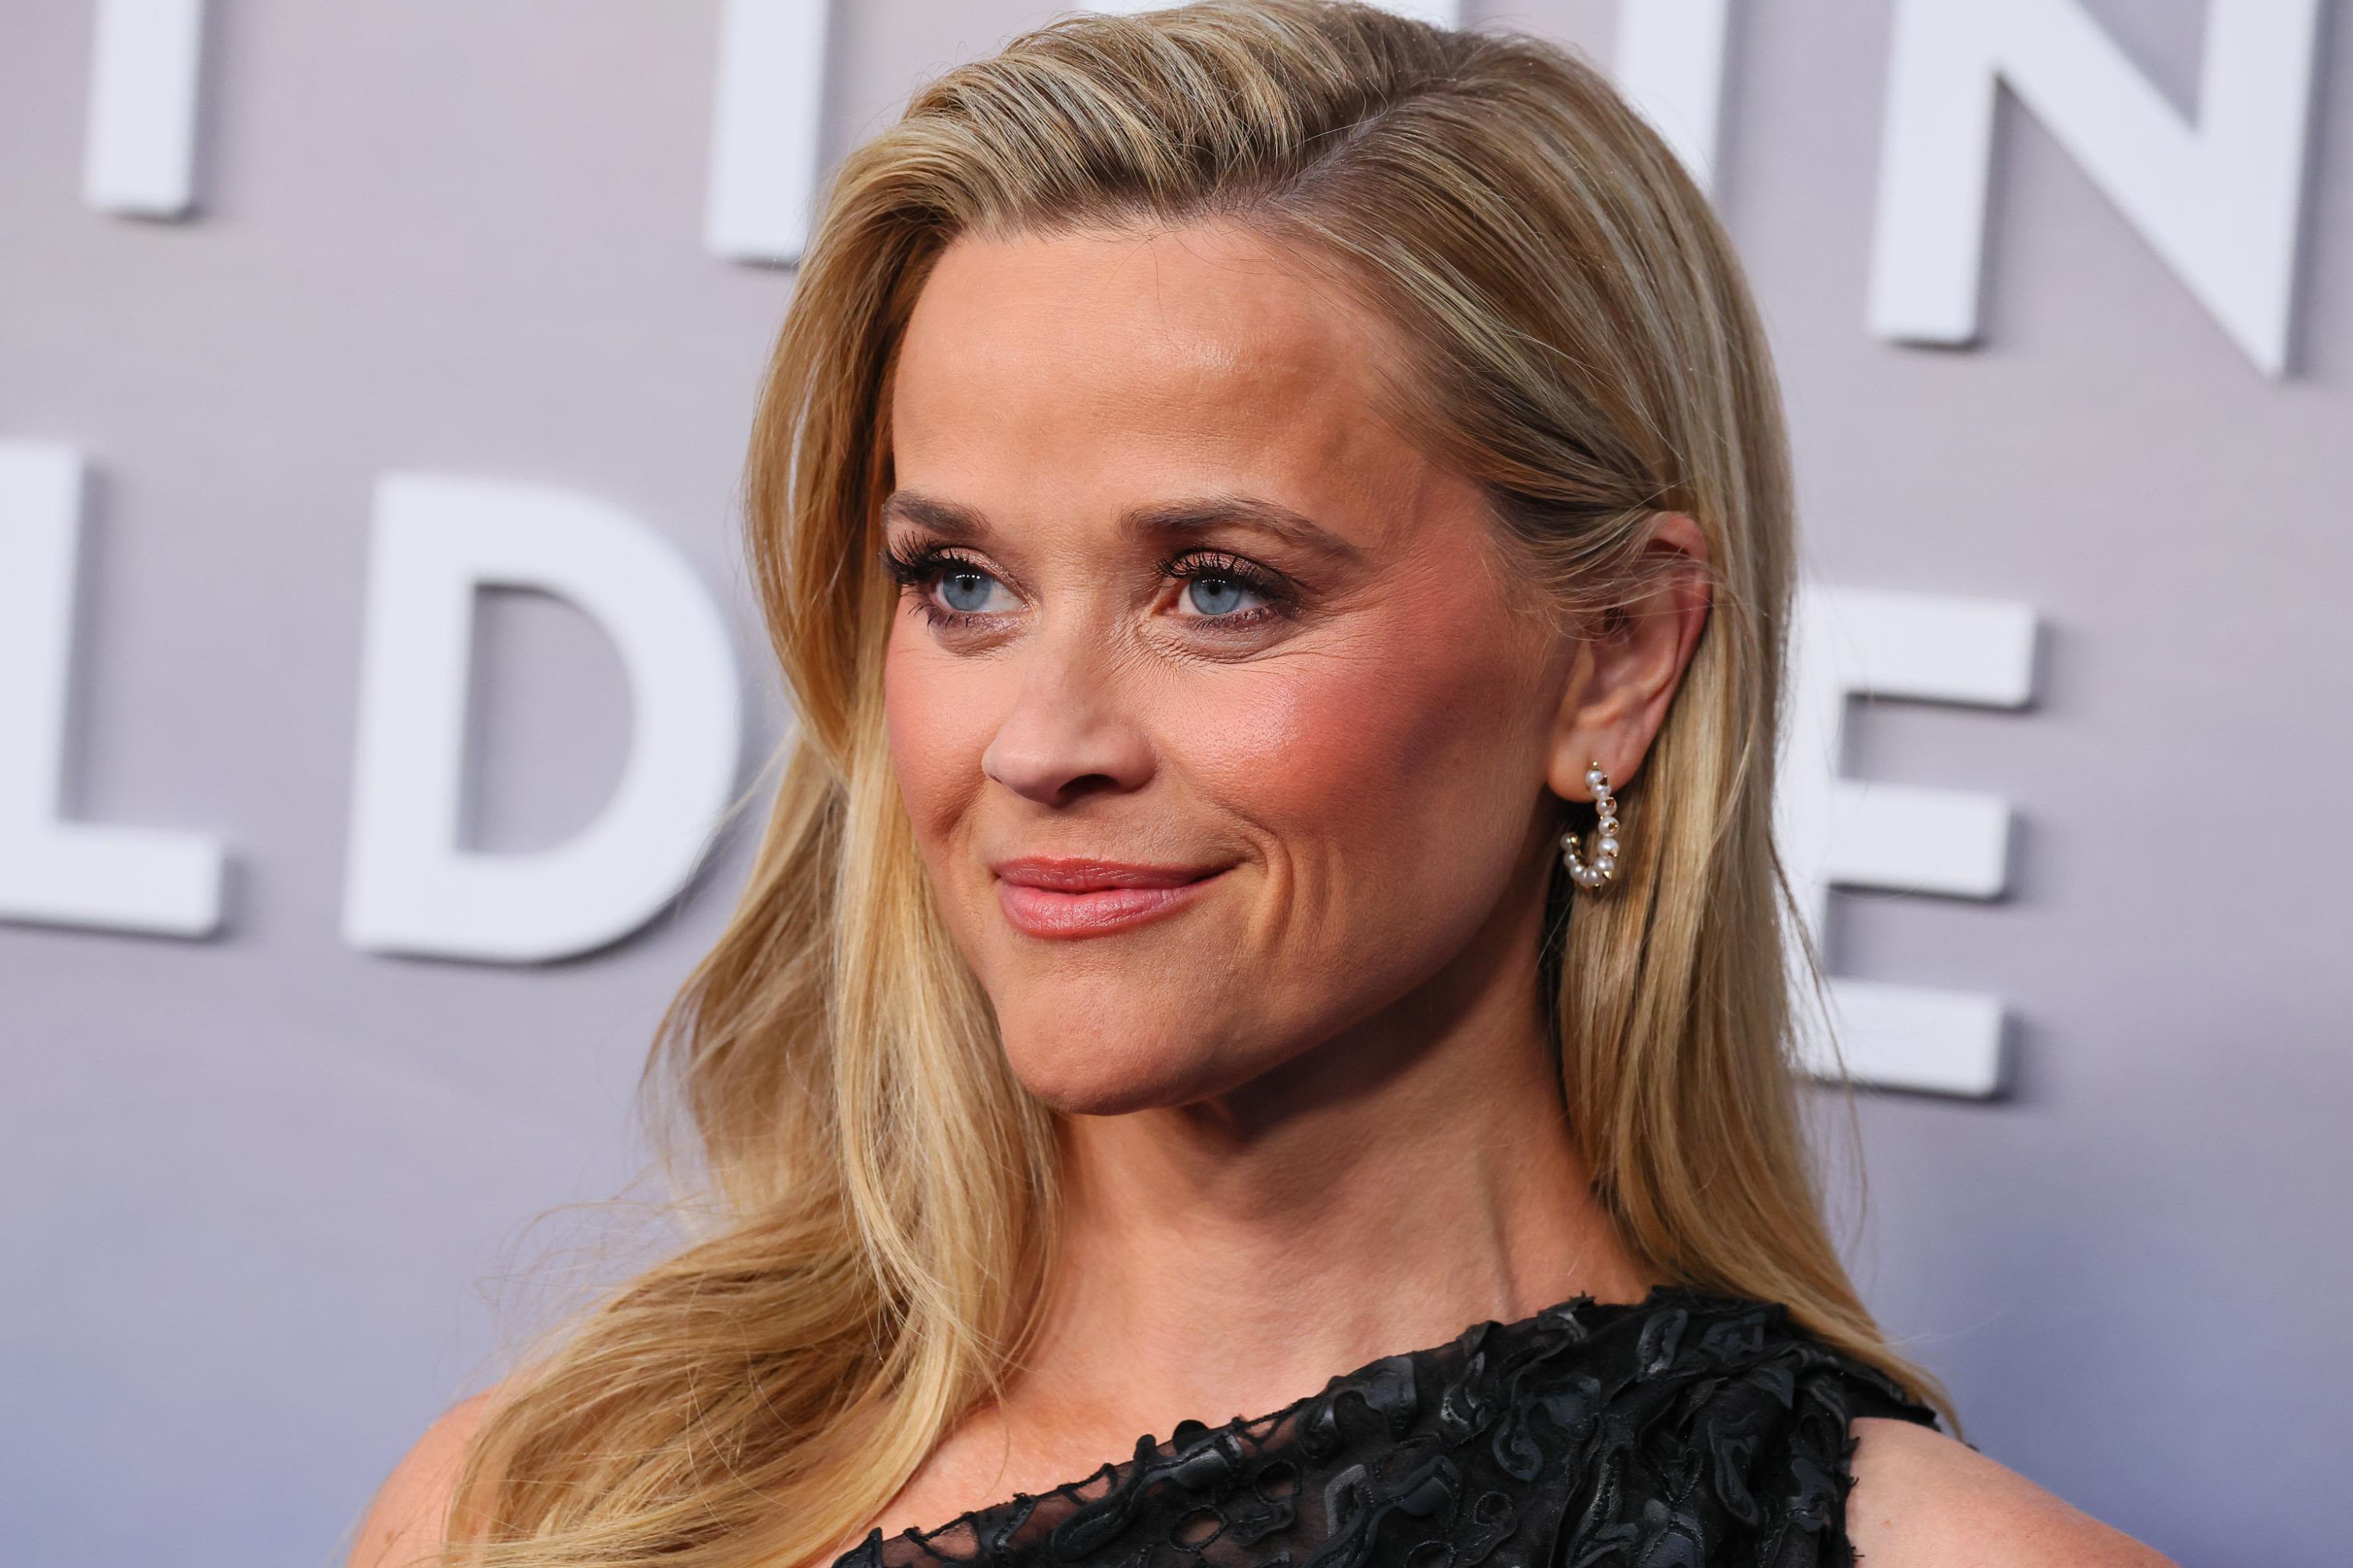 Reese Witherspoon's clothing line Draper James drops new summer essentials  - Good Morning America